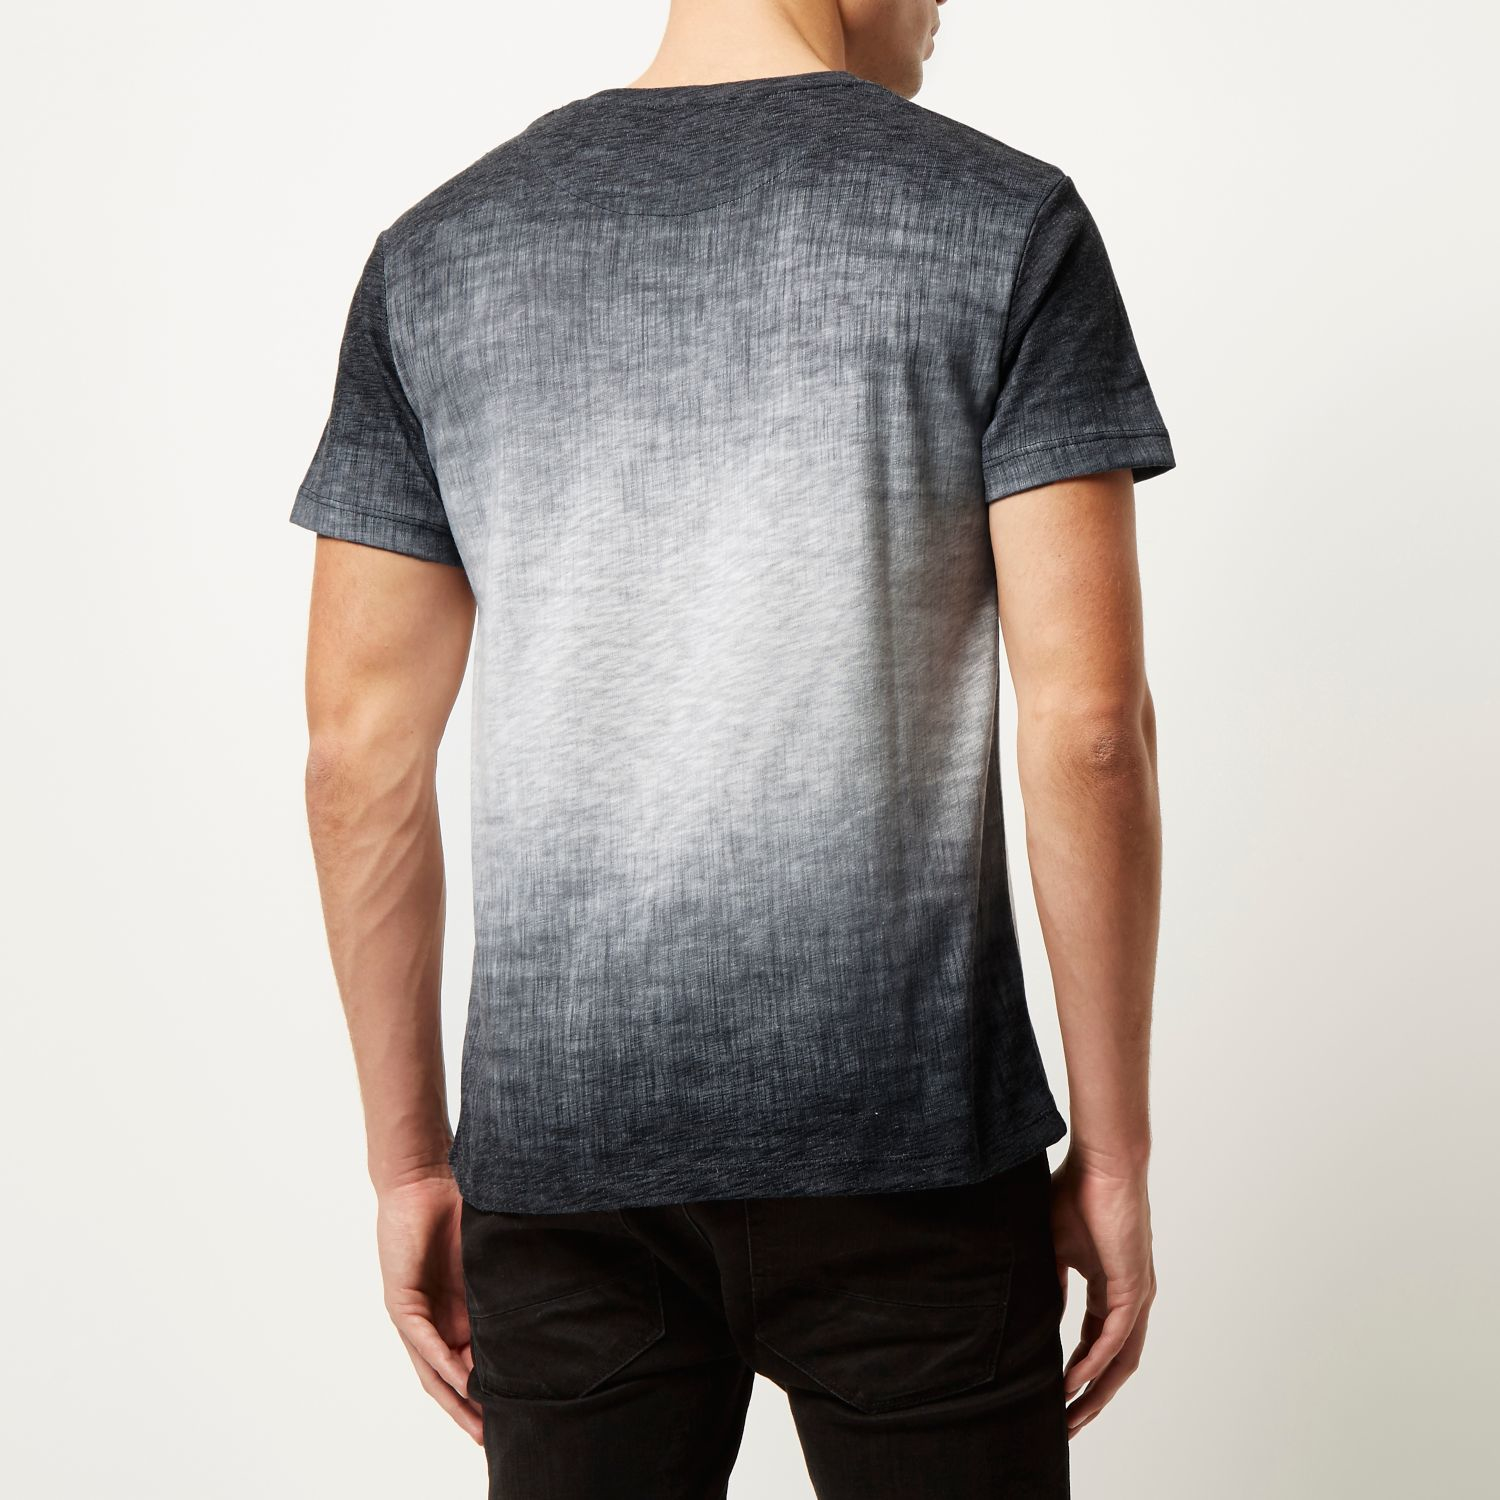 River Island Cotton Dark Grey Textured Faded T-shirt in Gray for Men - Lyst